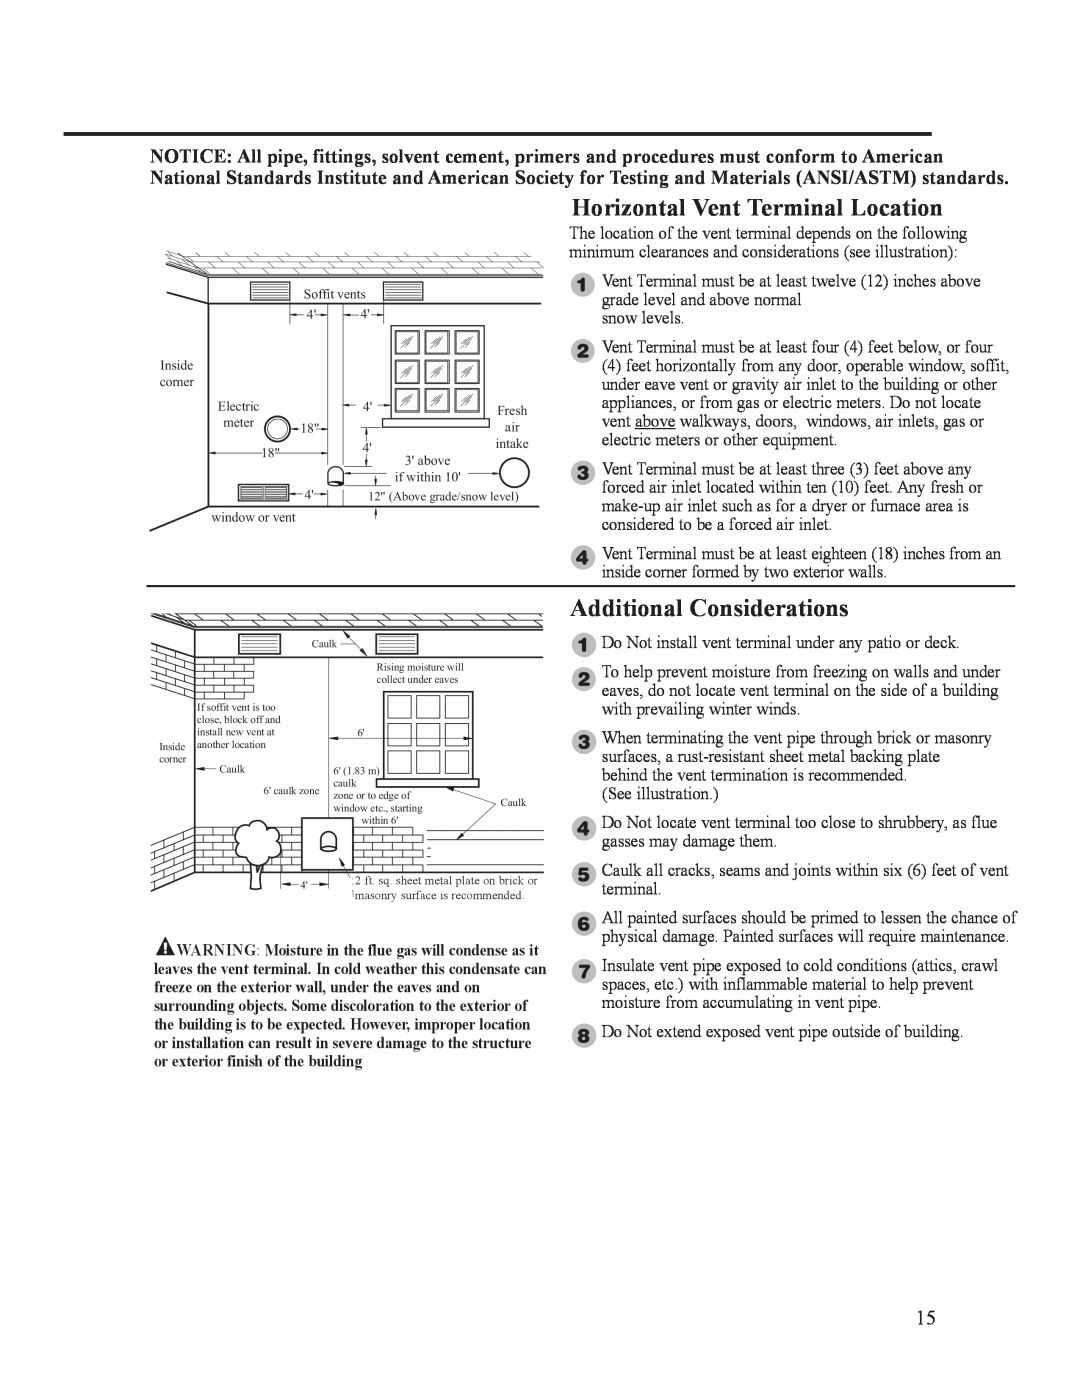 Ruud AP14236 installation instructions Horizontal Vent Terminal Location, Additional Considerations 